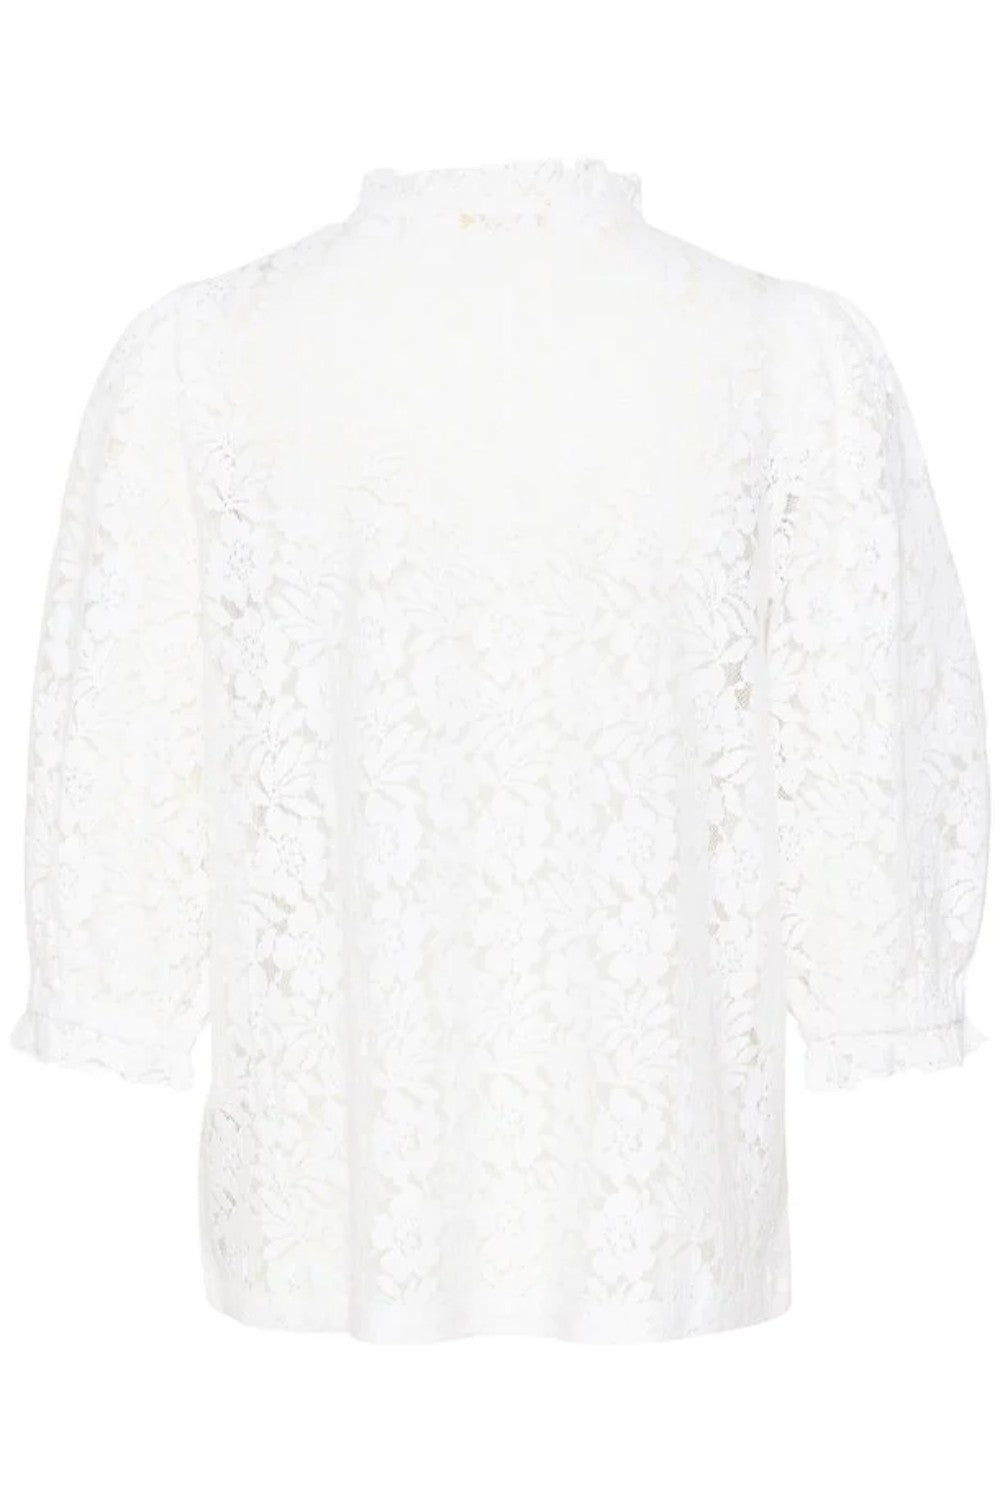 This stylish knitted blouse features an A-shape fit and hip-length cut, perfect for a chic, casual look. The short sleeves extend below the elbow, adding a unique touch to its design. Pair with fitted jeans or a flowing skirt for a complete outfit.